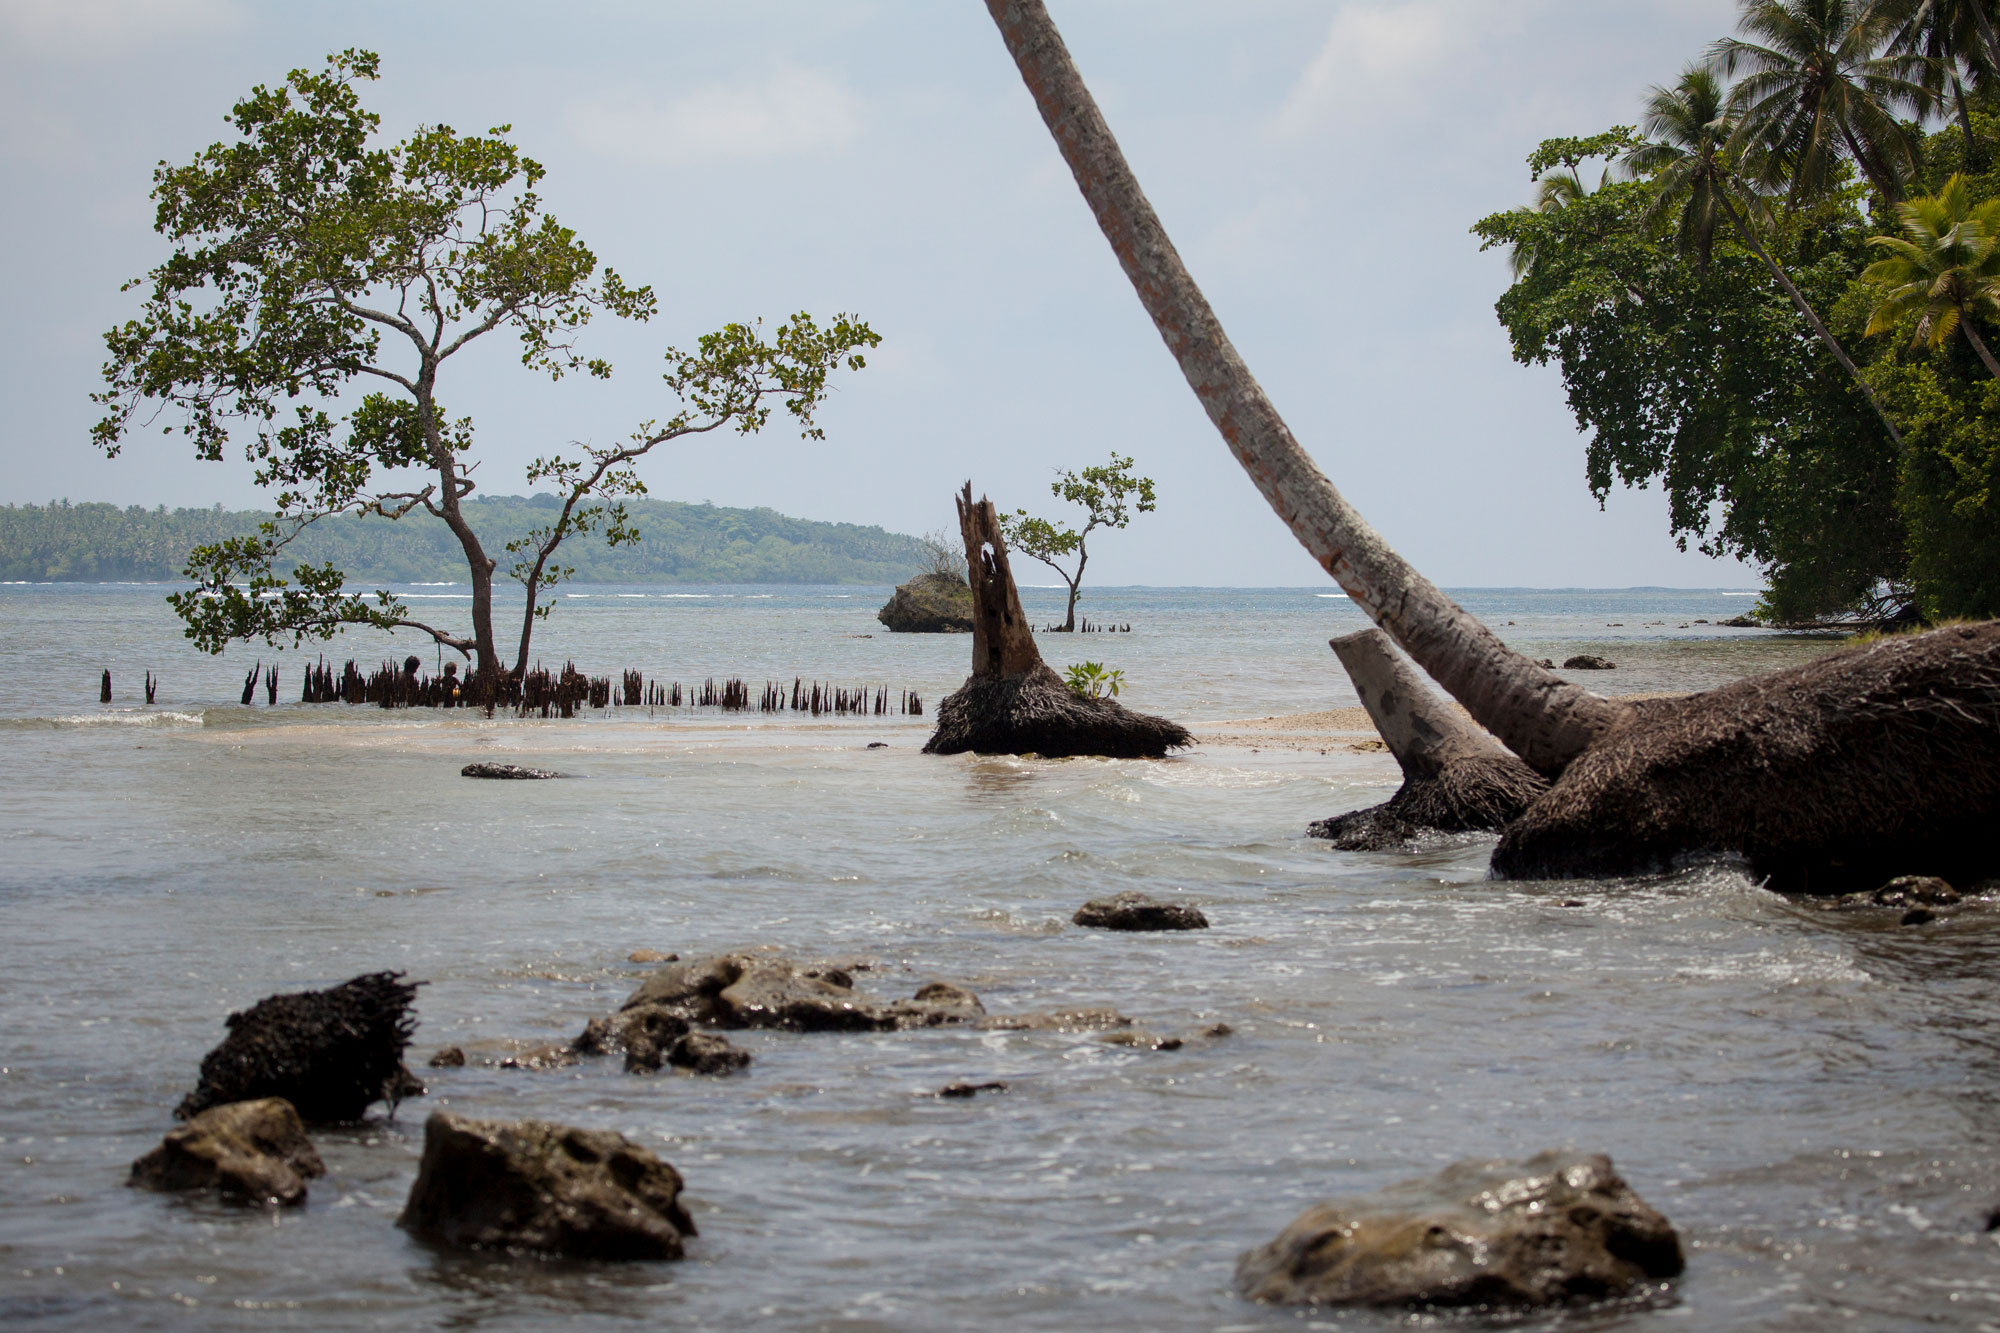 Photograph of the coast of Nggatokae, an island in the Solomon Islands. The photo shows a coastline with living and dead trees.